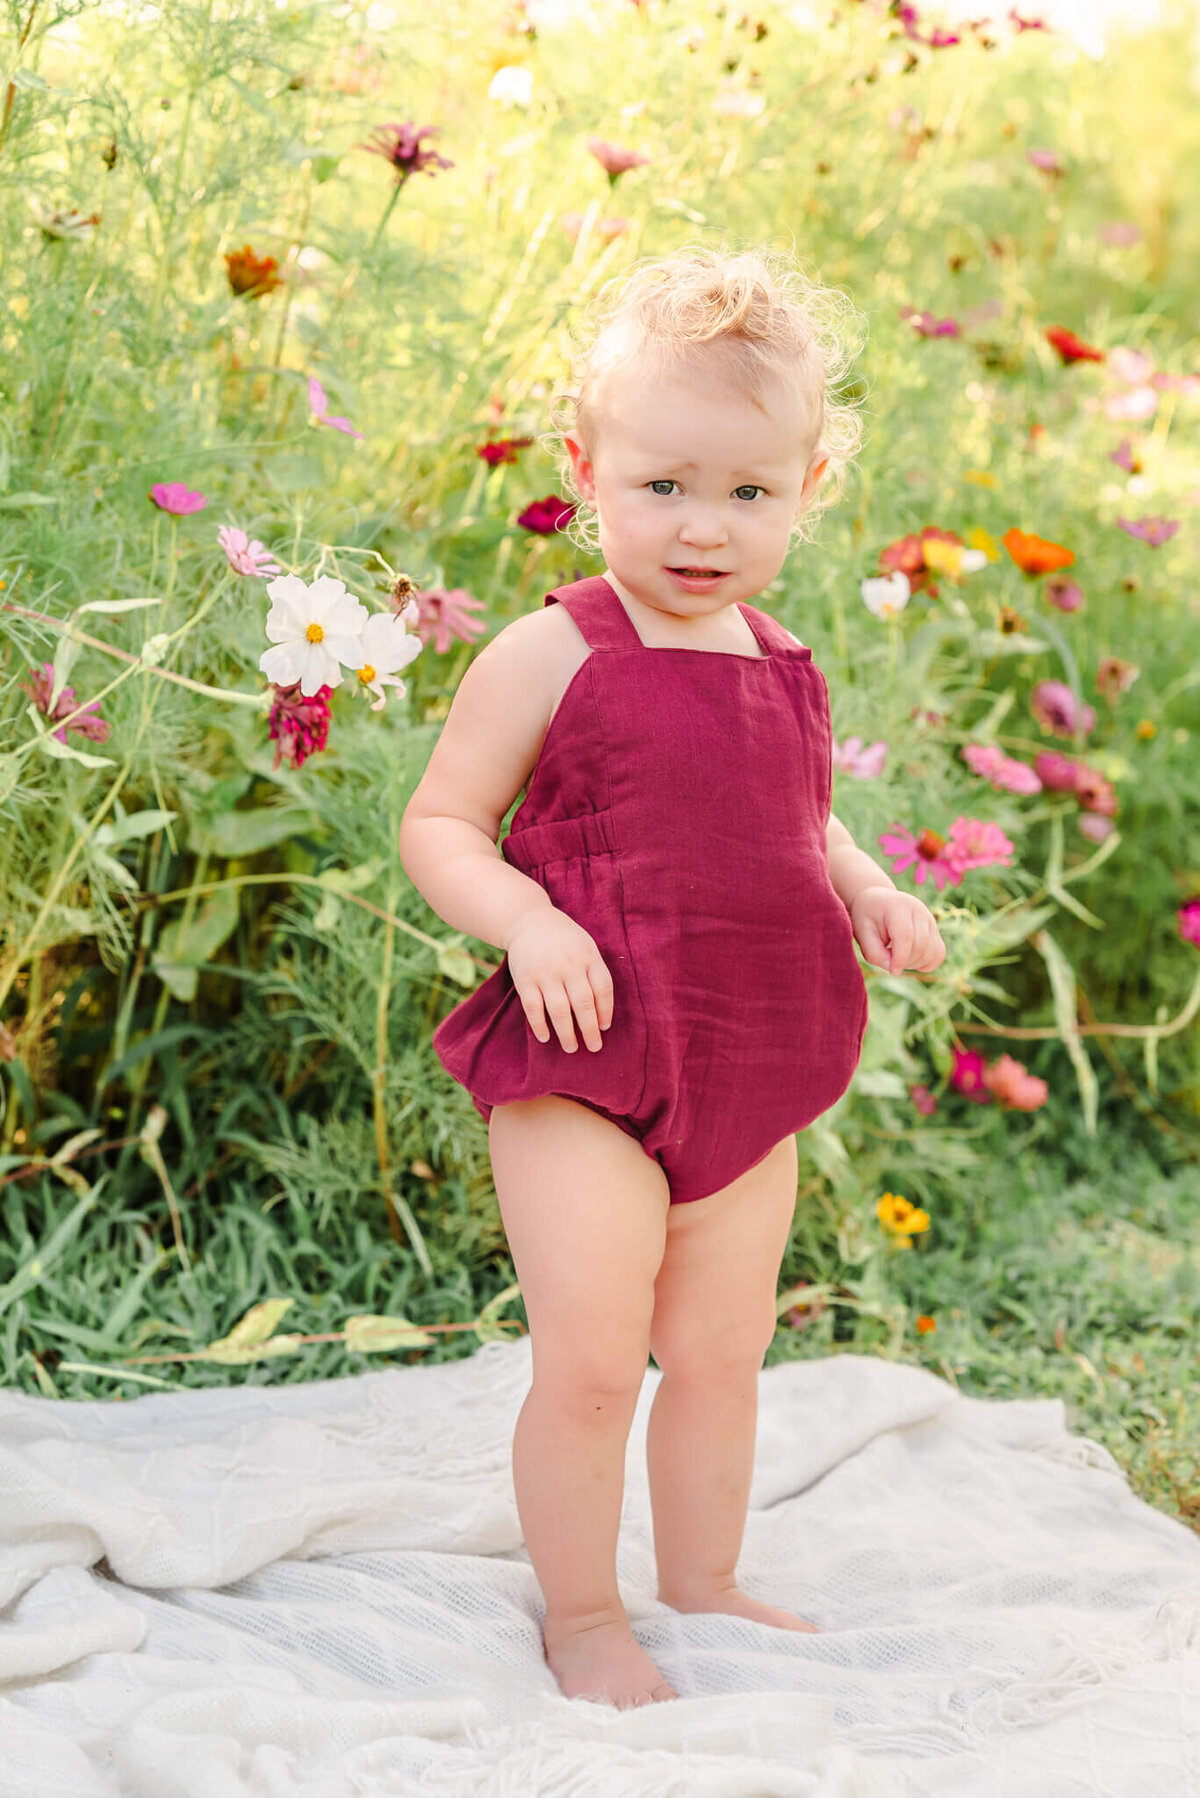 A toddler wearing a red romper smiles for the camera while standing on a blanket in a wildflower field near the Outer Banks.